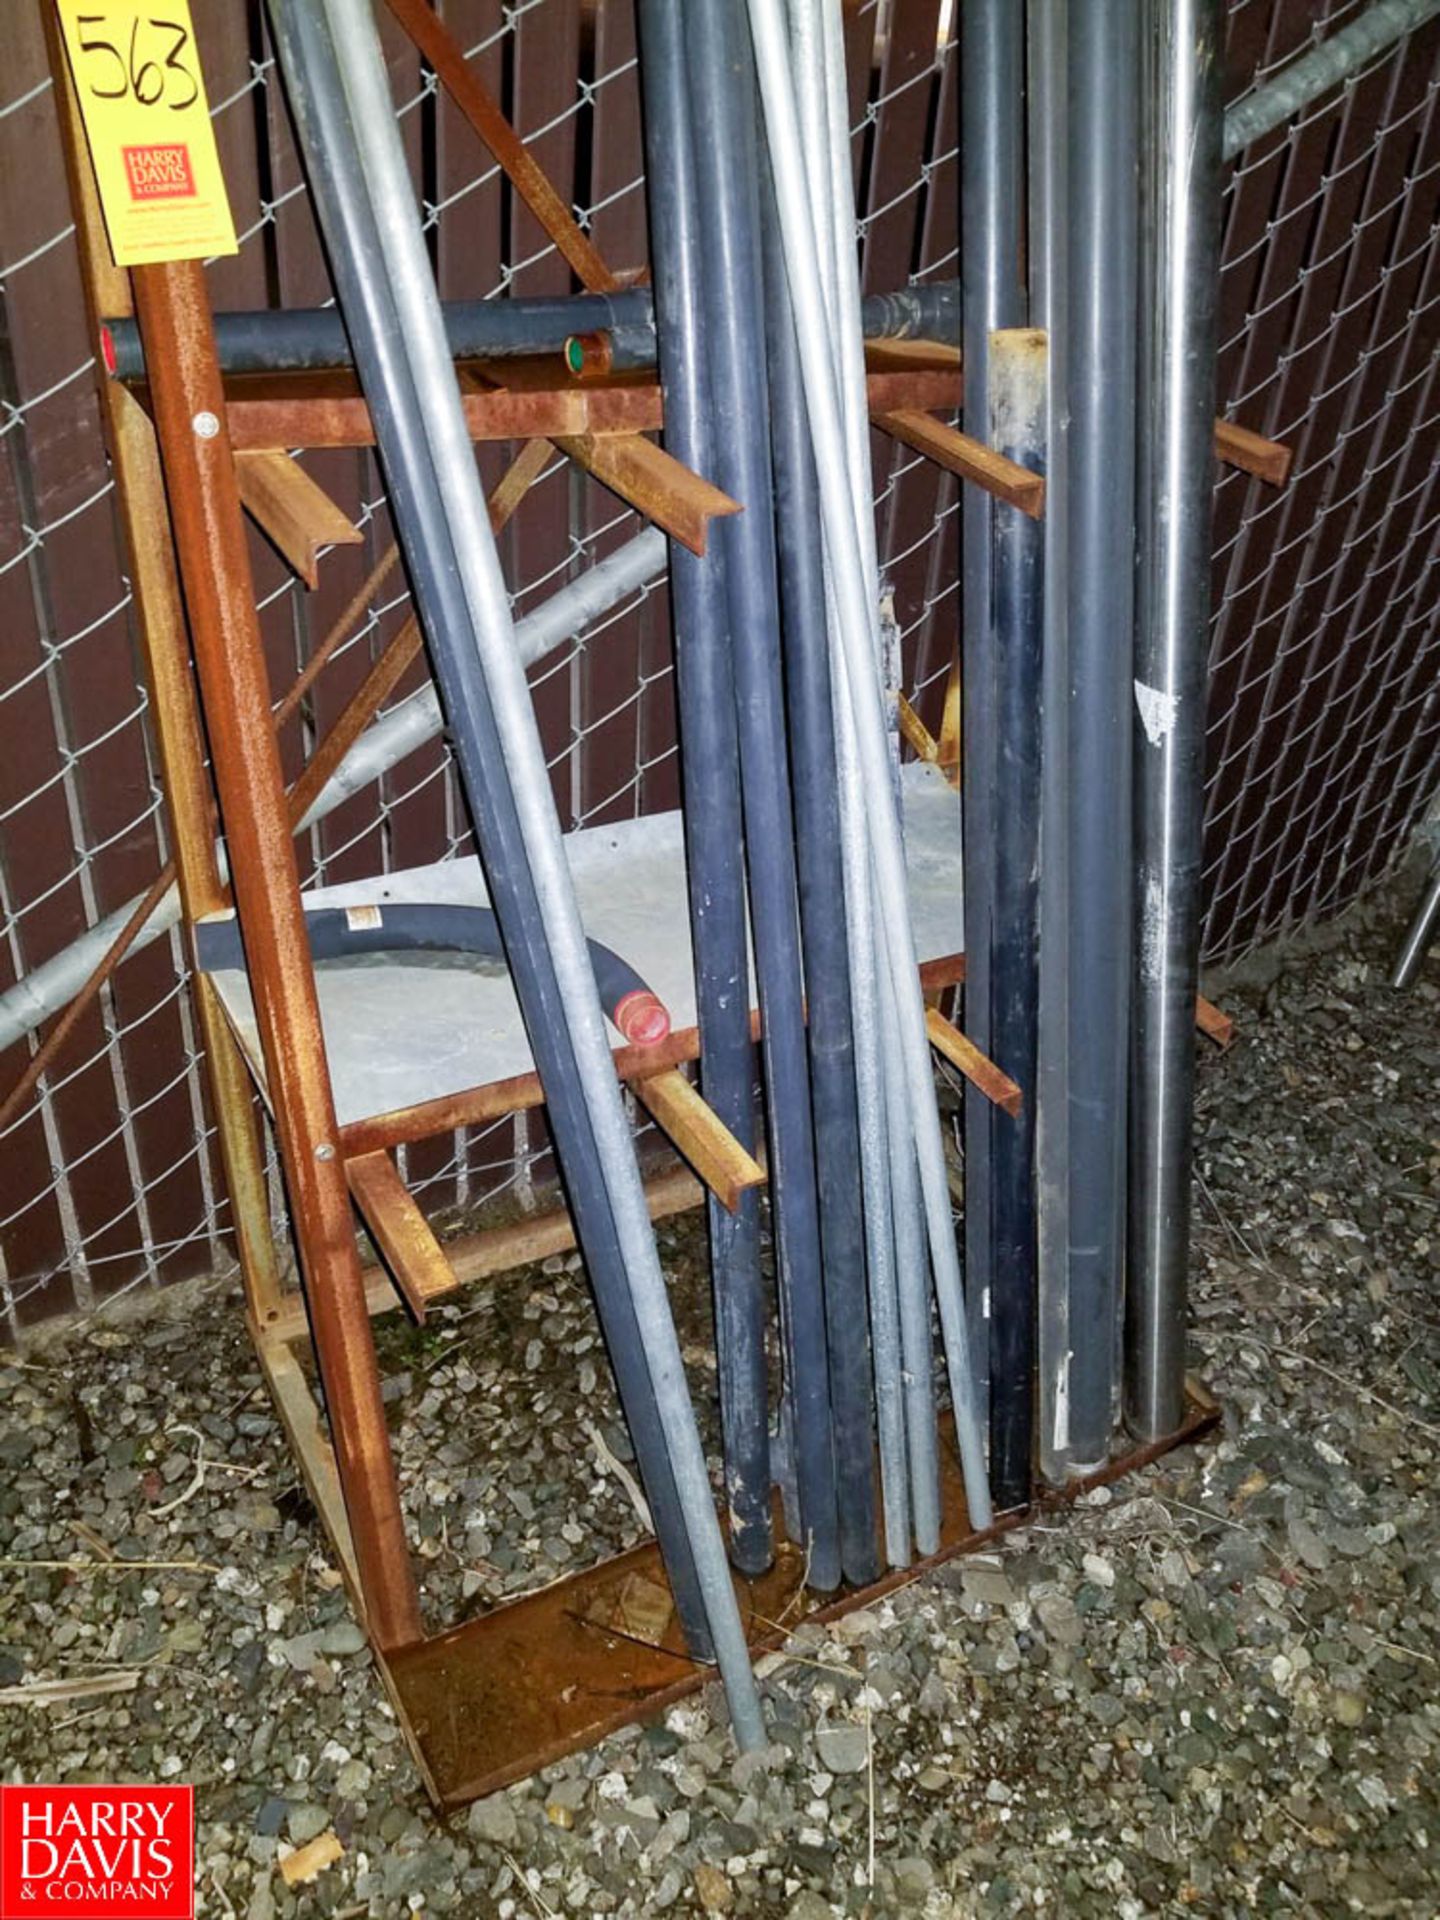 Pipe Racks with PVC Pipe Conduit - Rigging Fee: $150 - Image 3 of 3